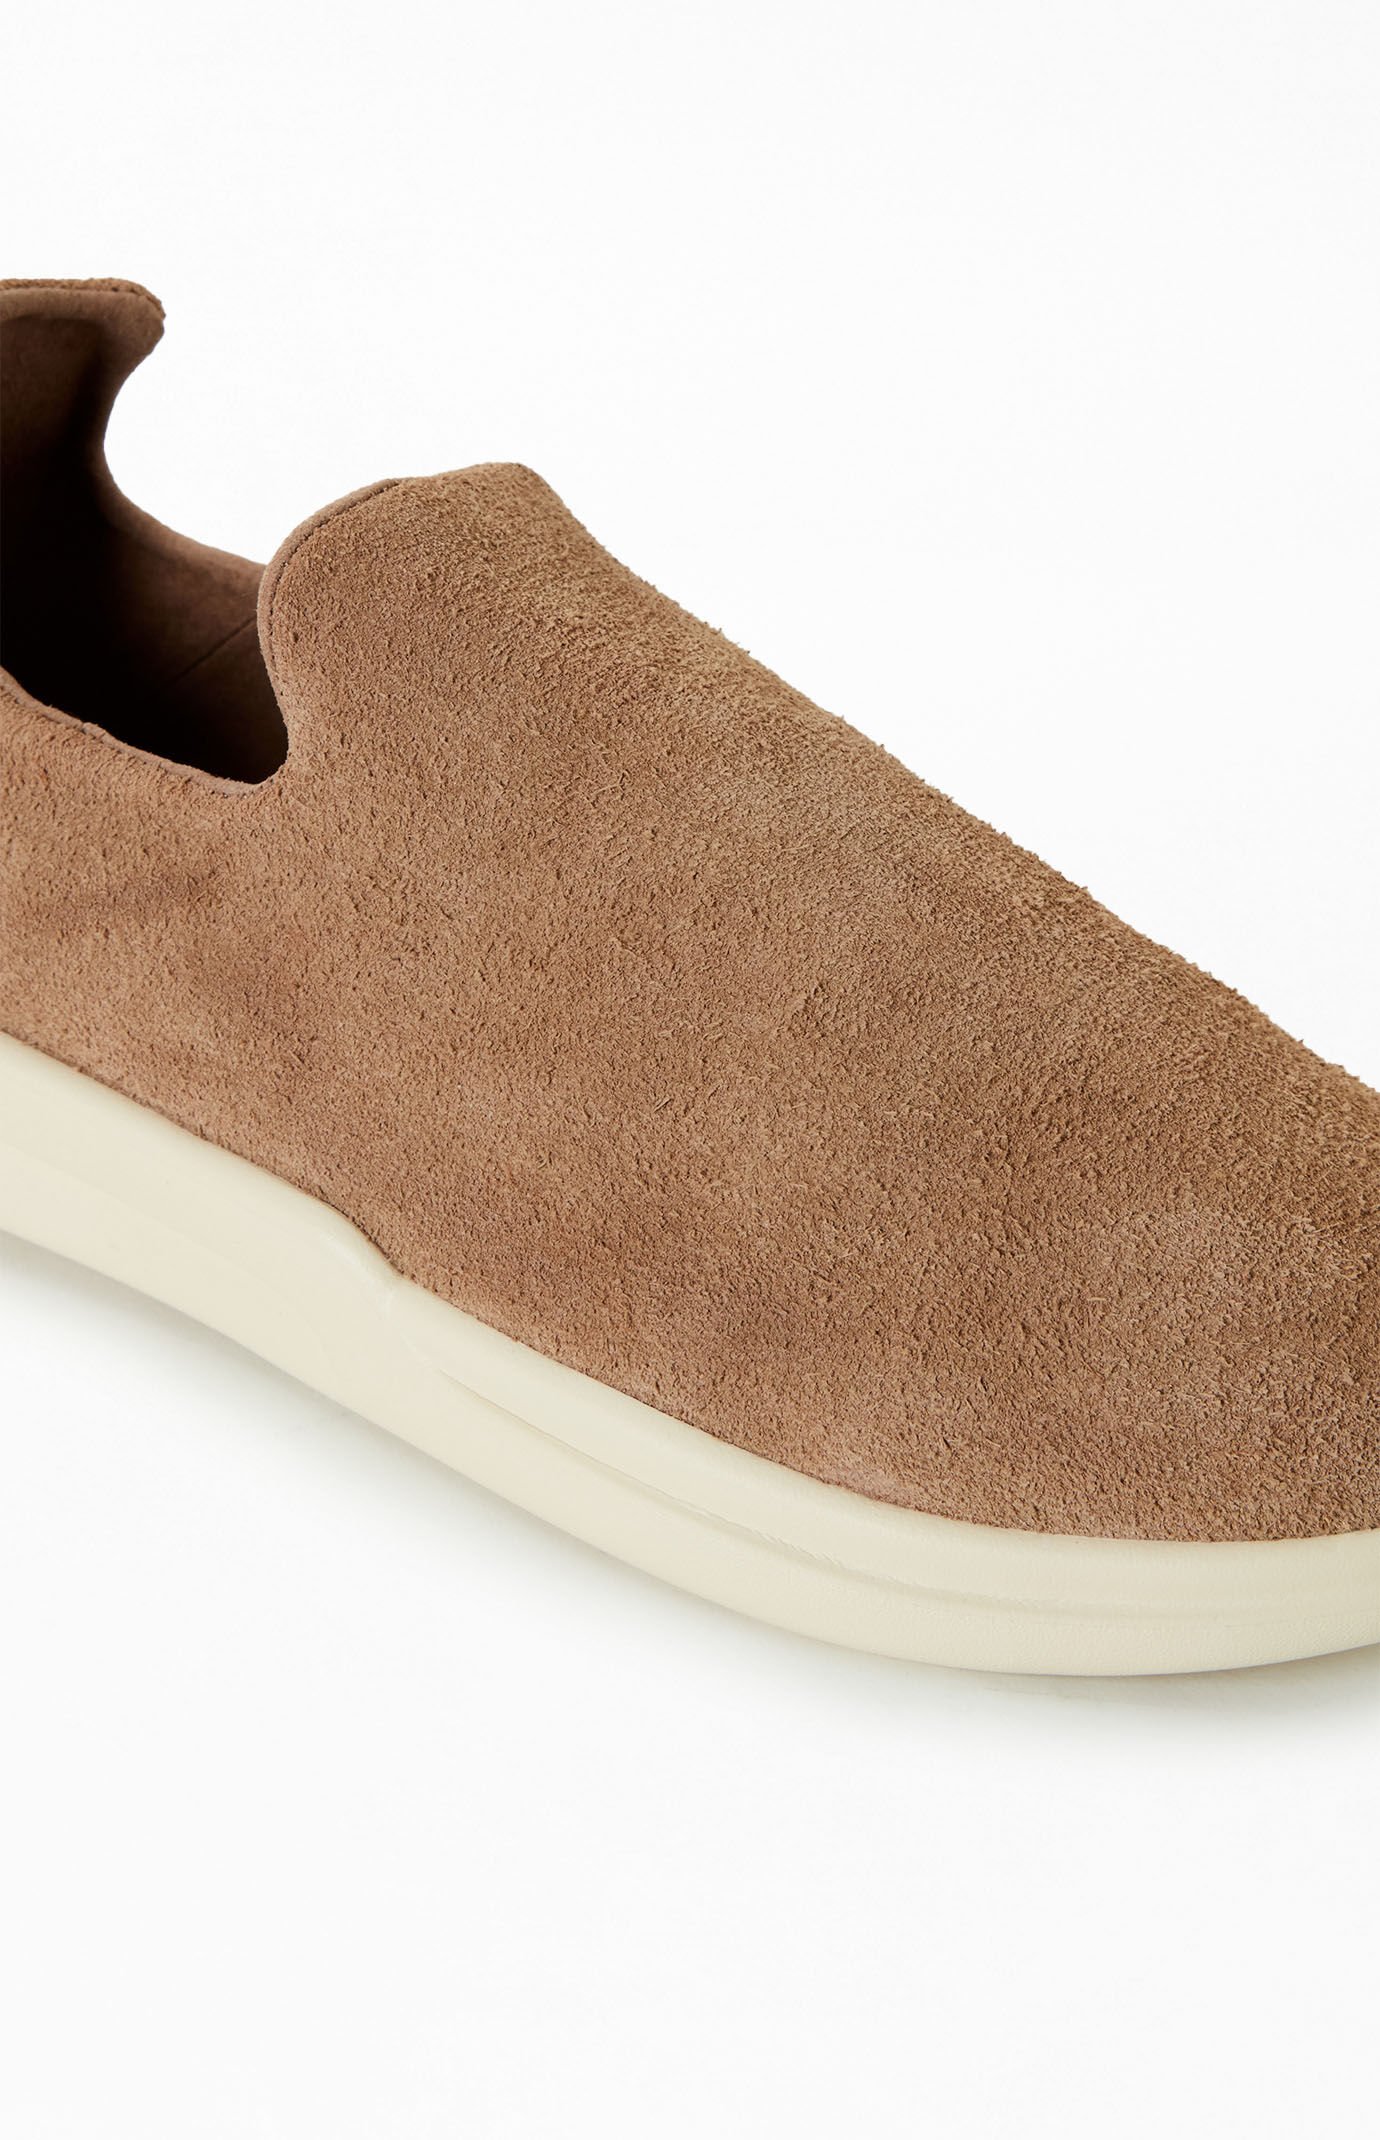 LUSSO CLOUD Nomad Suede Slip On Shoes